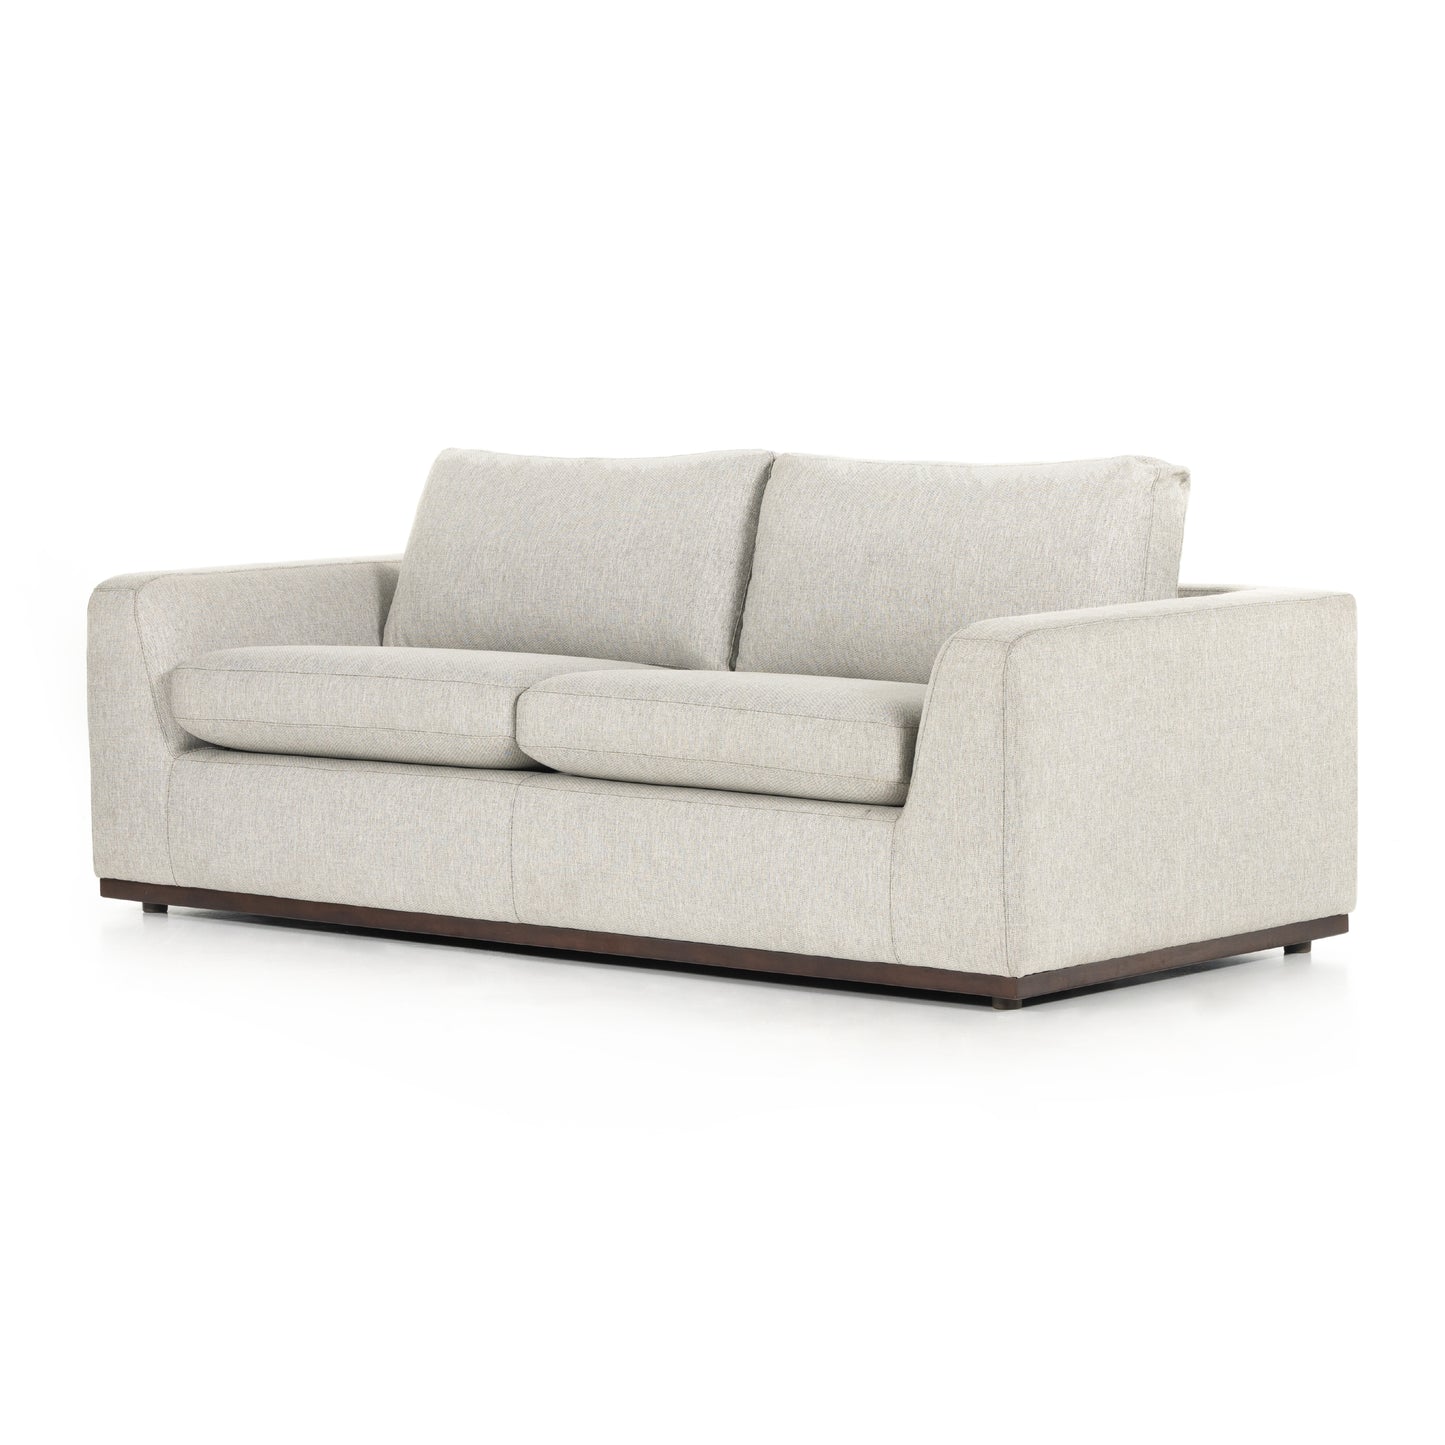 Load image into Gallery viewer, Colt Sofa Bed Aldred SilverSofabed Four Hands  Aldred Silver   Four Hands, Mid Century Modern Furniture, Old Bones Furniture Company, Old Bones Co, Modern Mid Century, Designer Furniture, https://www.oldbonesco.com/
